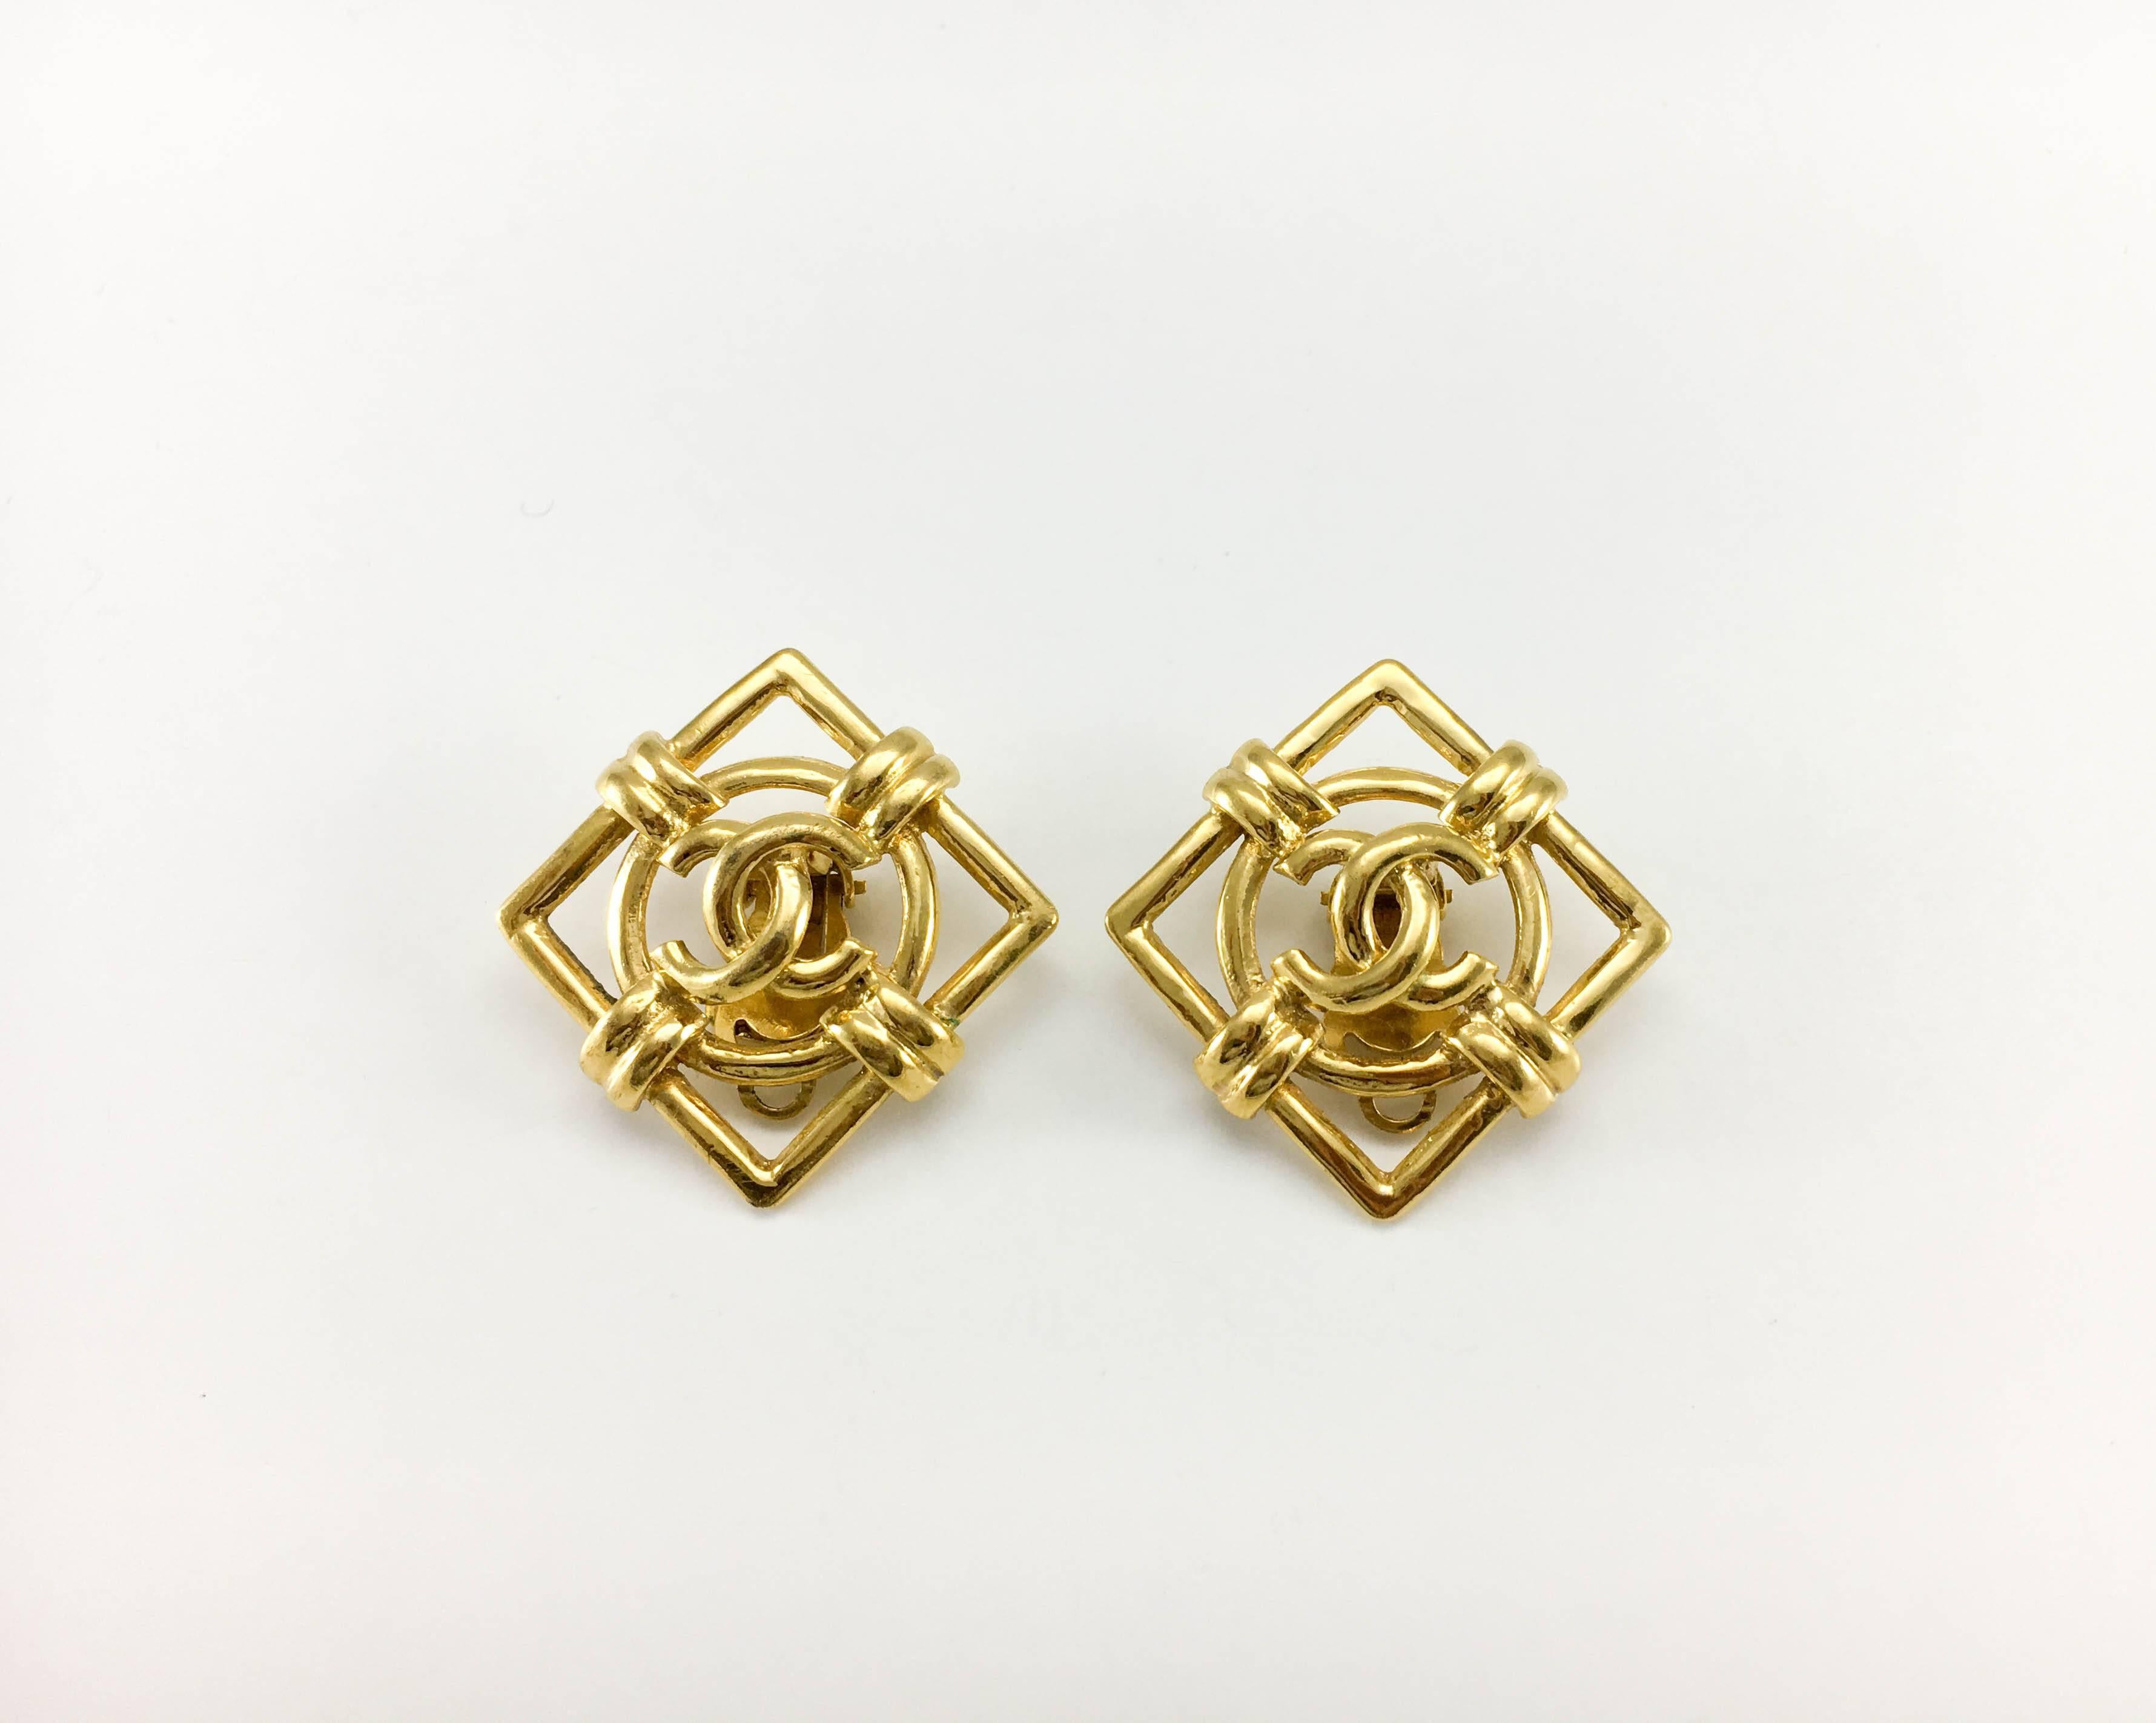 Vintage Chanel Gilt Lozenge Logo Clip-On Earrings. These stylish earrings by Chanel were created by iconic jewellery designer Victoire de Castellane for the 1992 collection. Made in gilt metal, the design plays with geometric shapes, bringing the